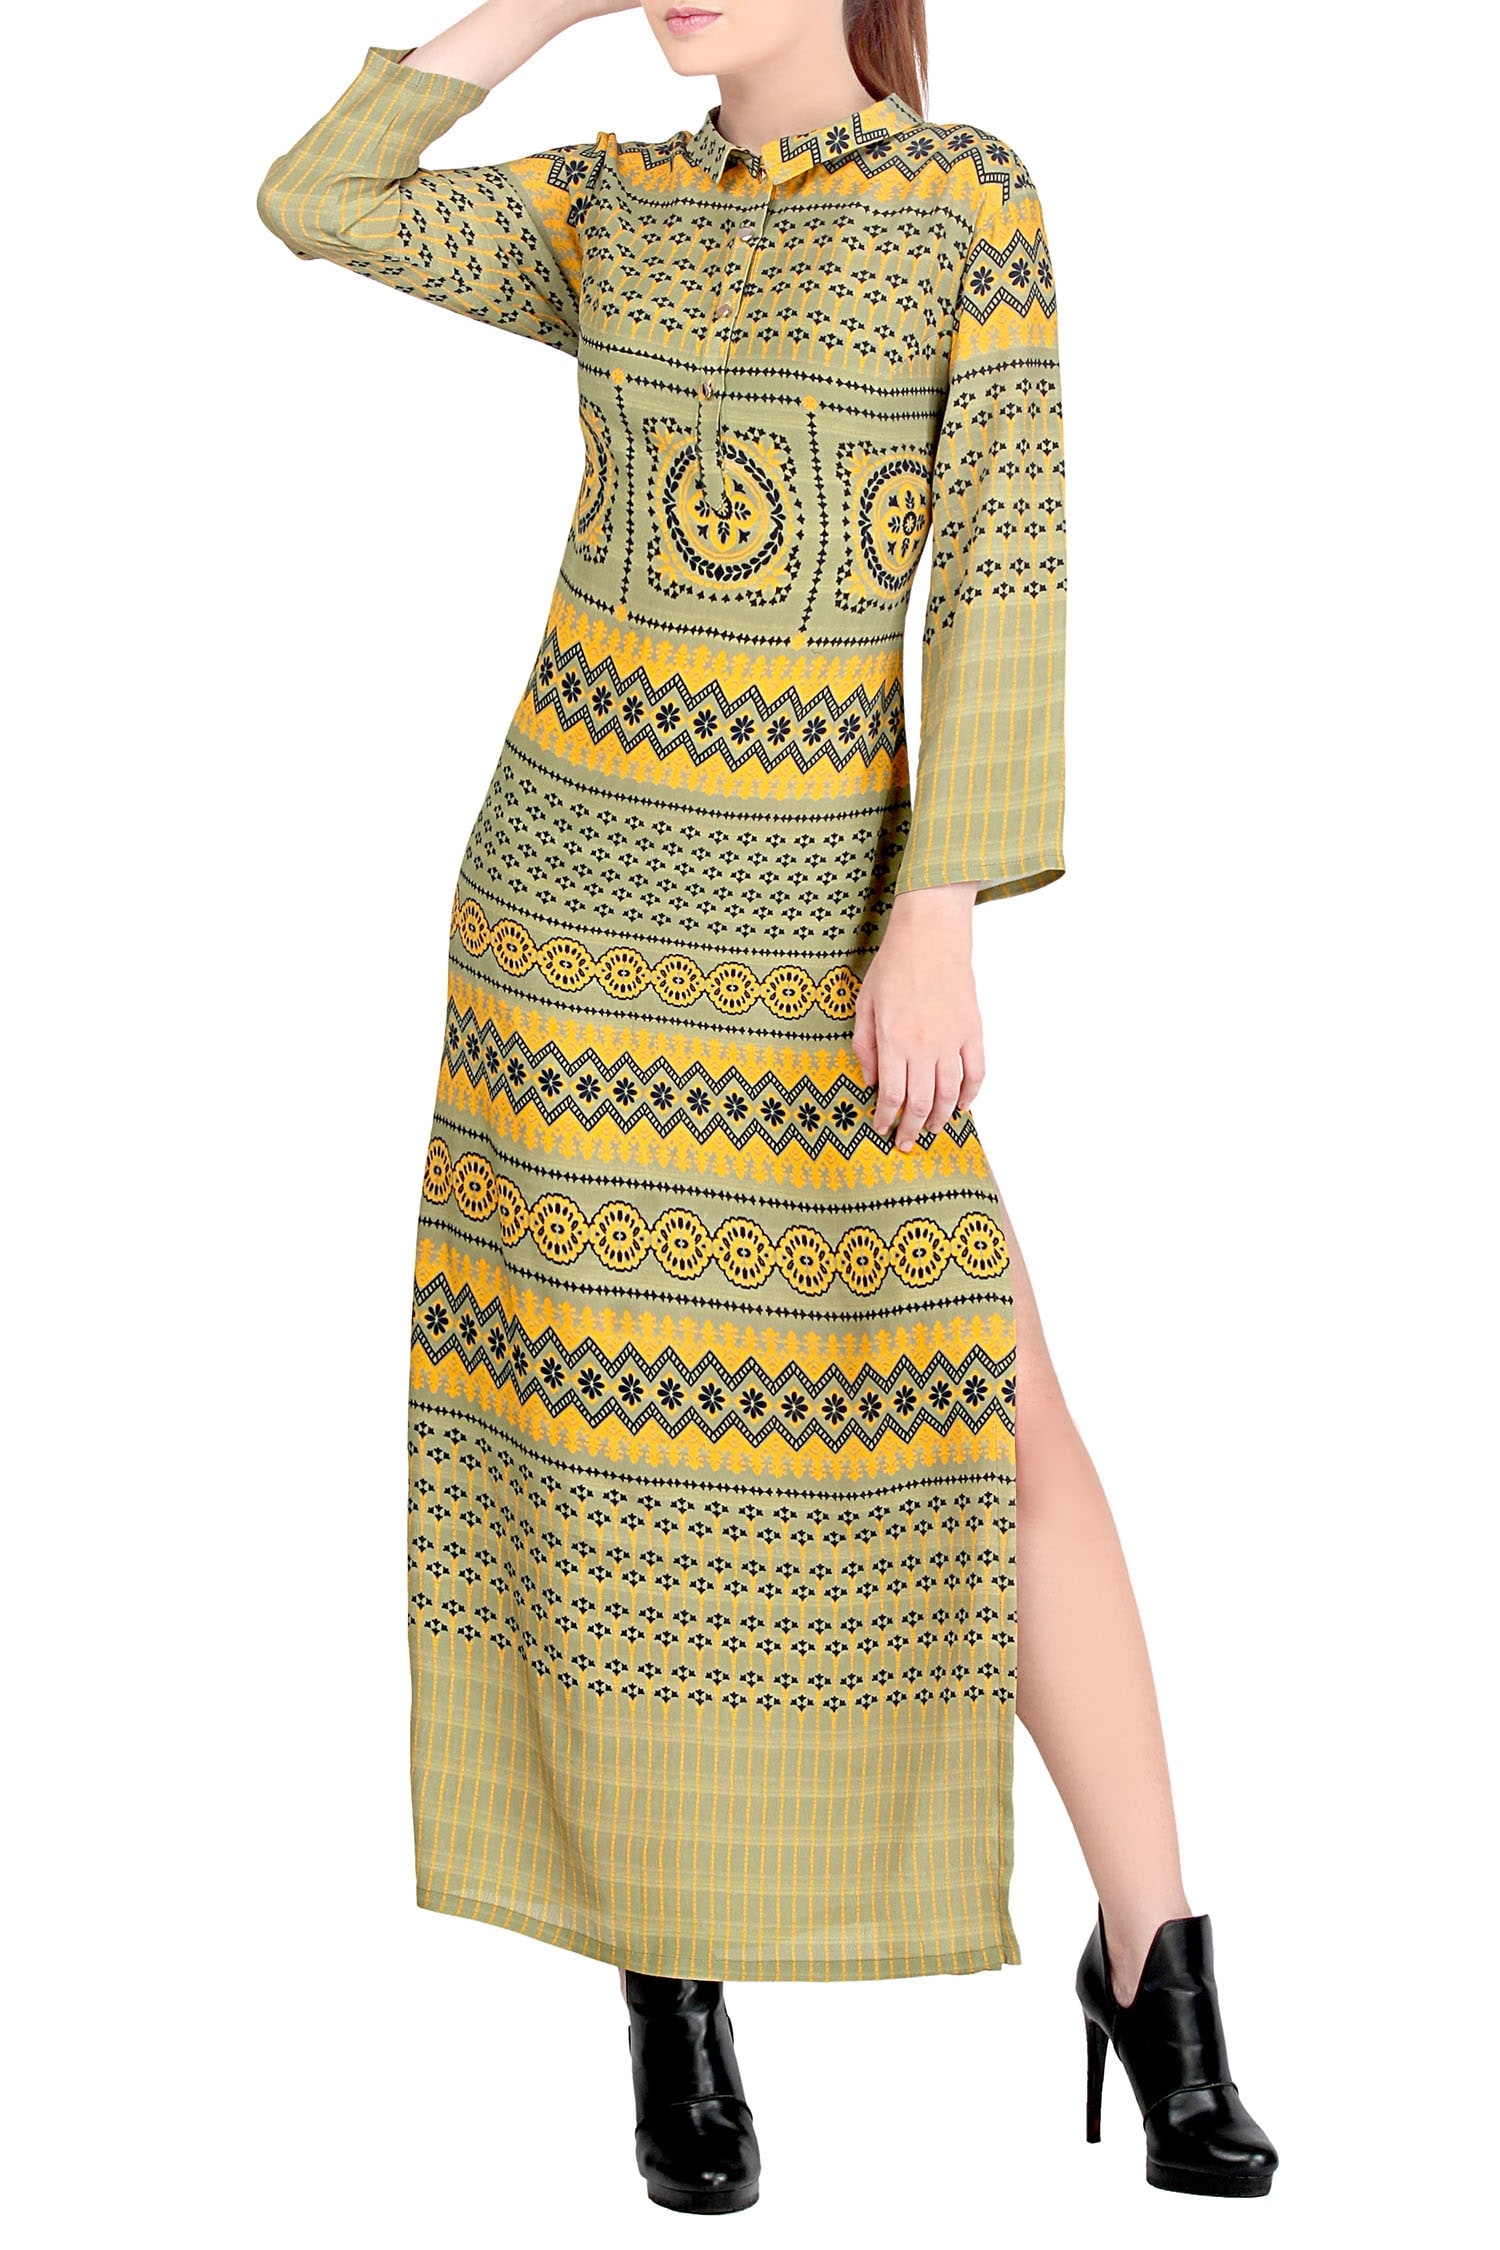 Soup by Sougat Paul Green And Yellow Printed Dress